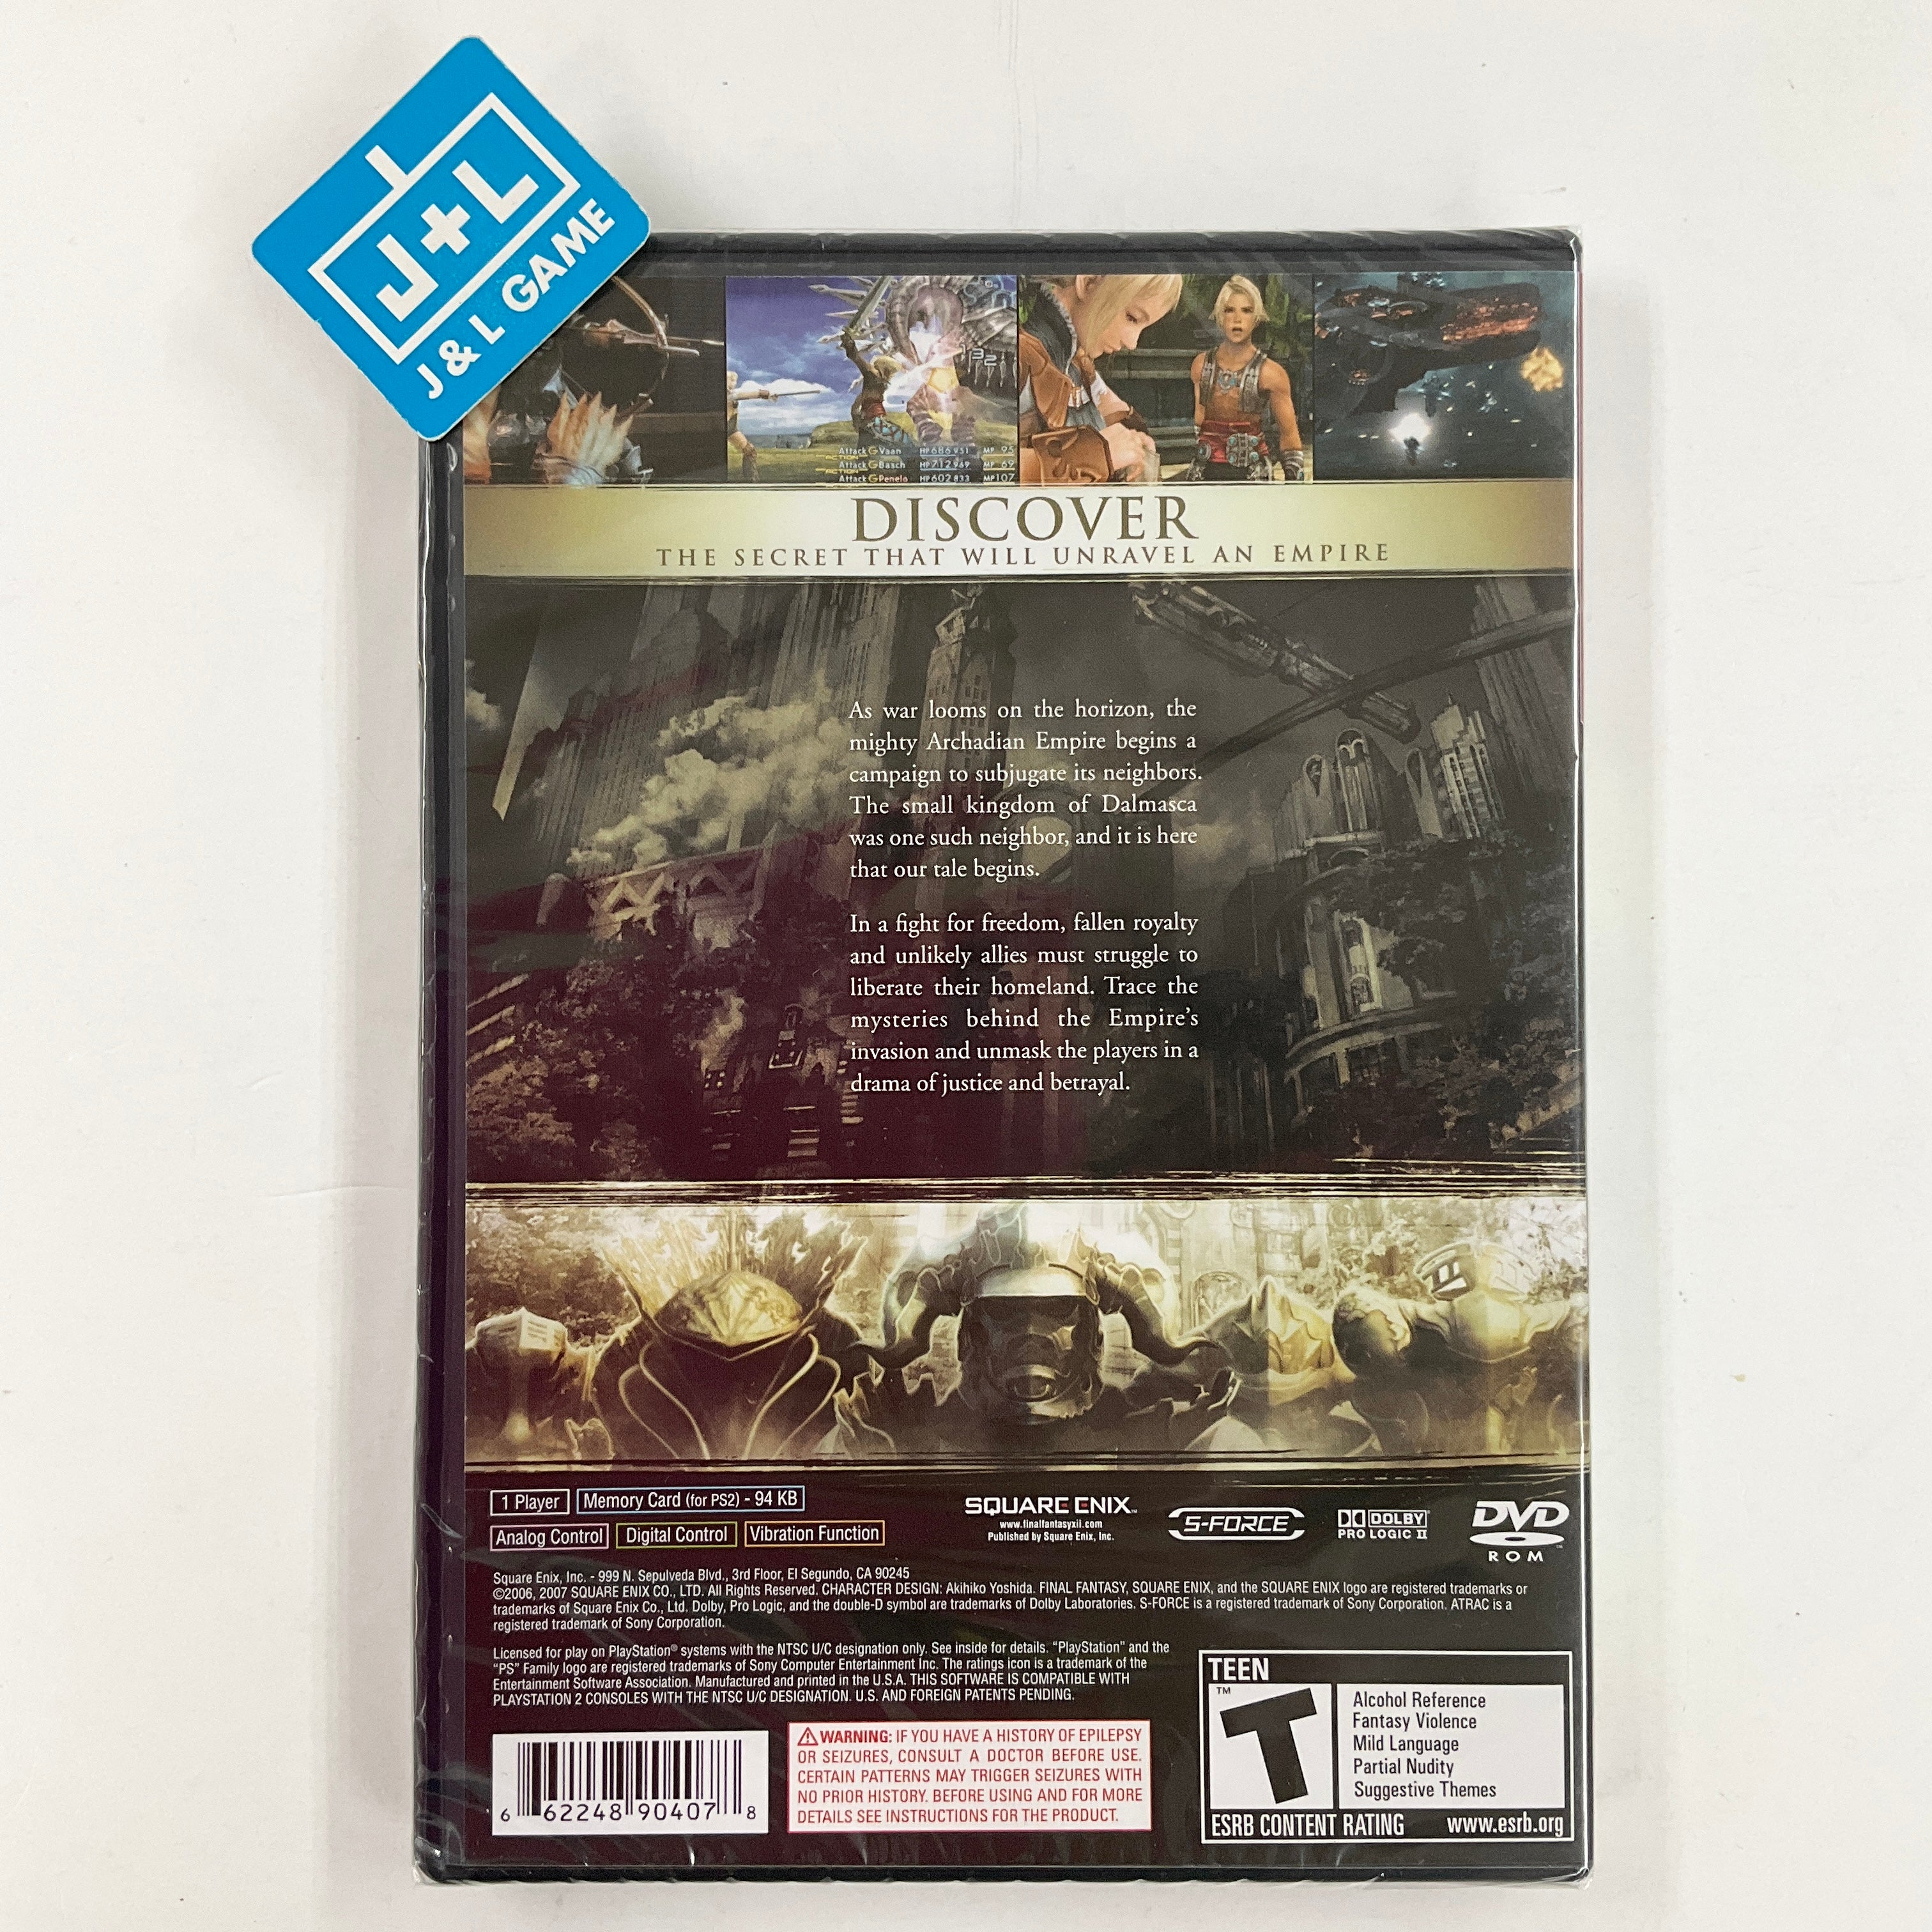 Final Fantasy XII (Greatest Hits) - (PS2) PlayStation 2 Video Games Square Enix   